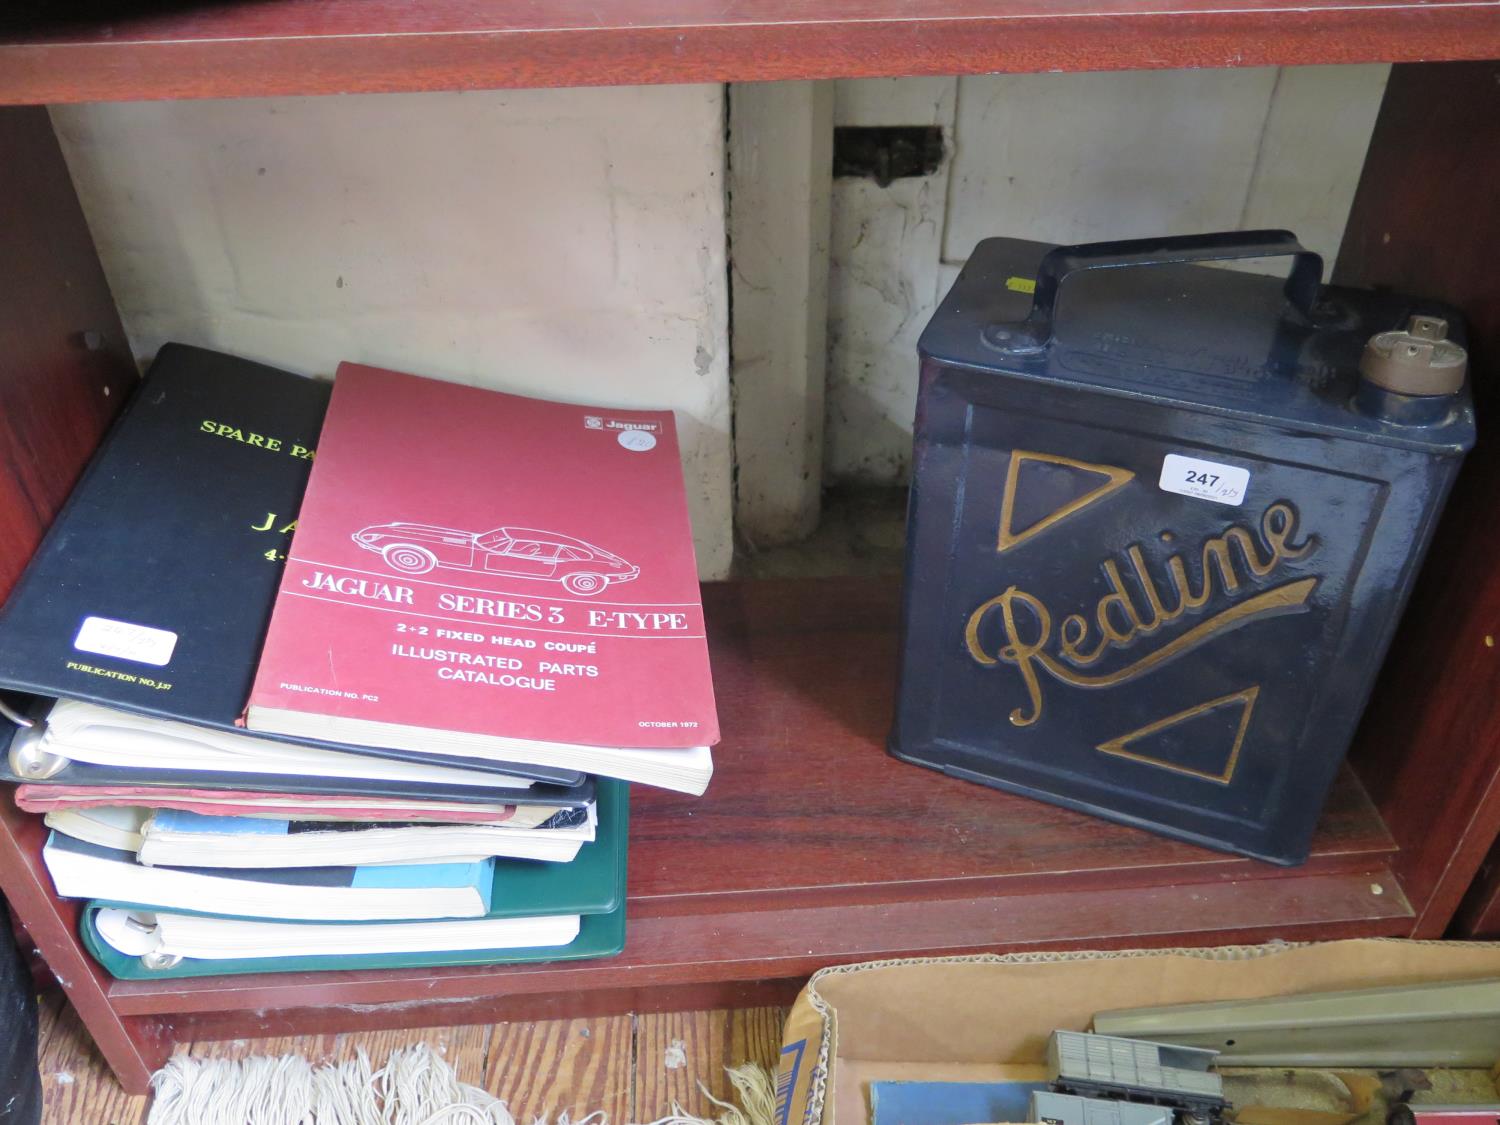 A 'Redline' motoring petrol can, and various Jaguar E-Type Service manuals and parts catalogues